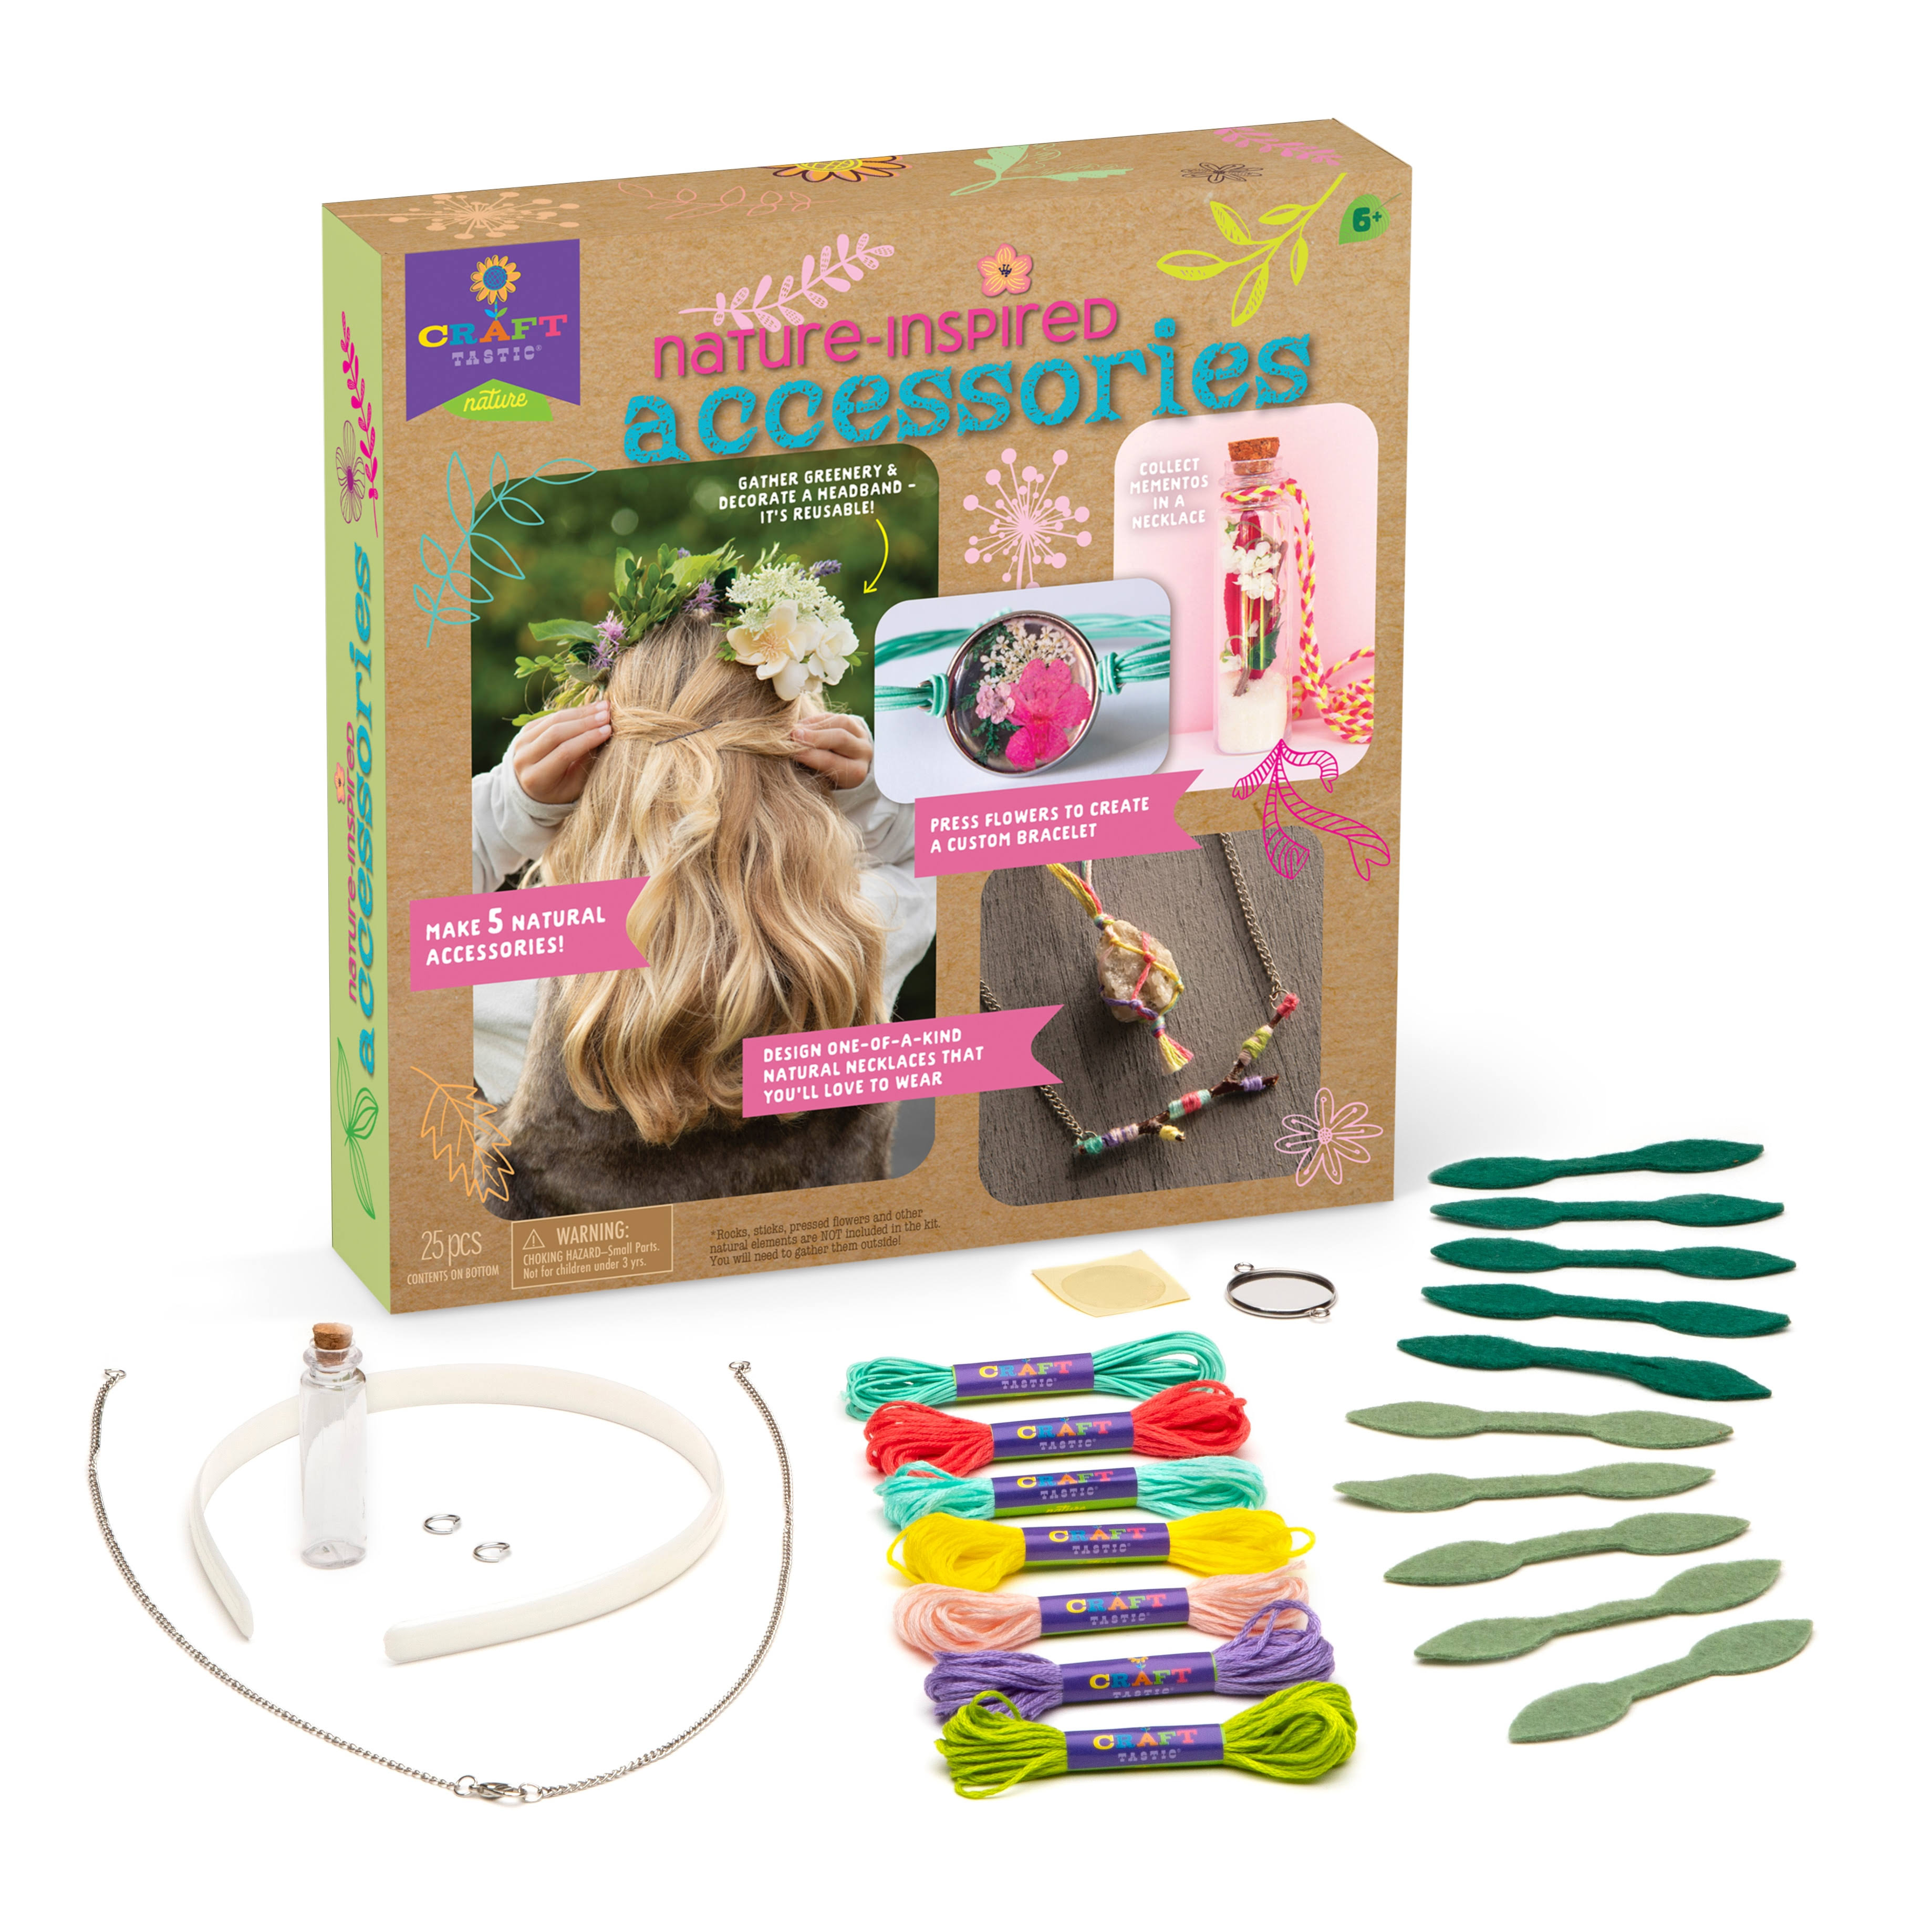 Craft-tastic Nature-Inspired Accessories Craft Kit One-Size